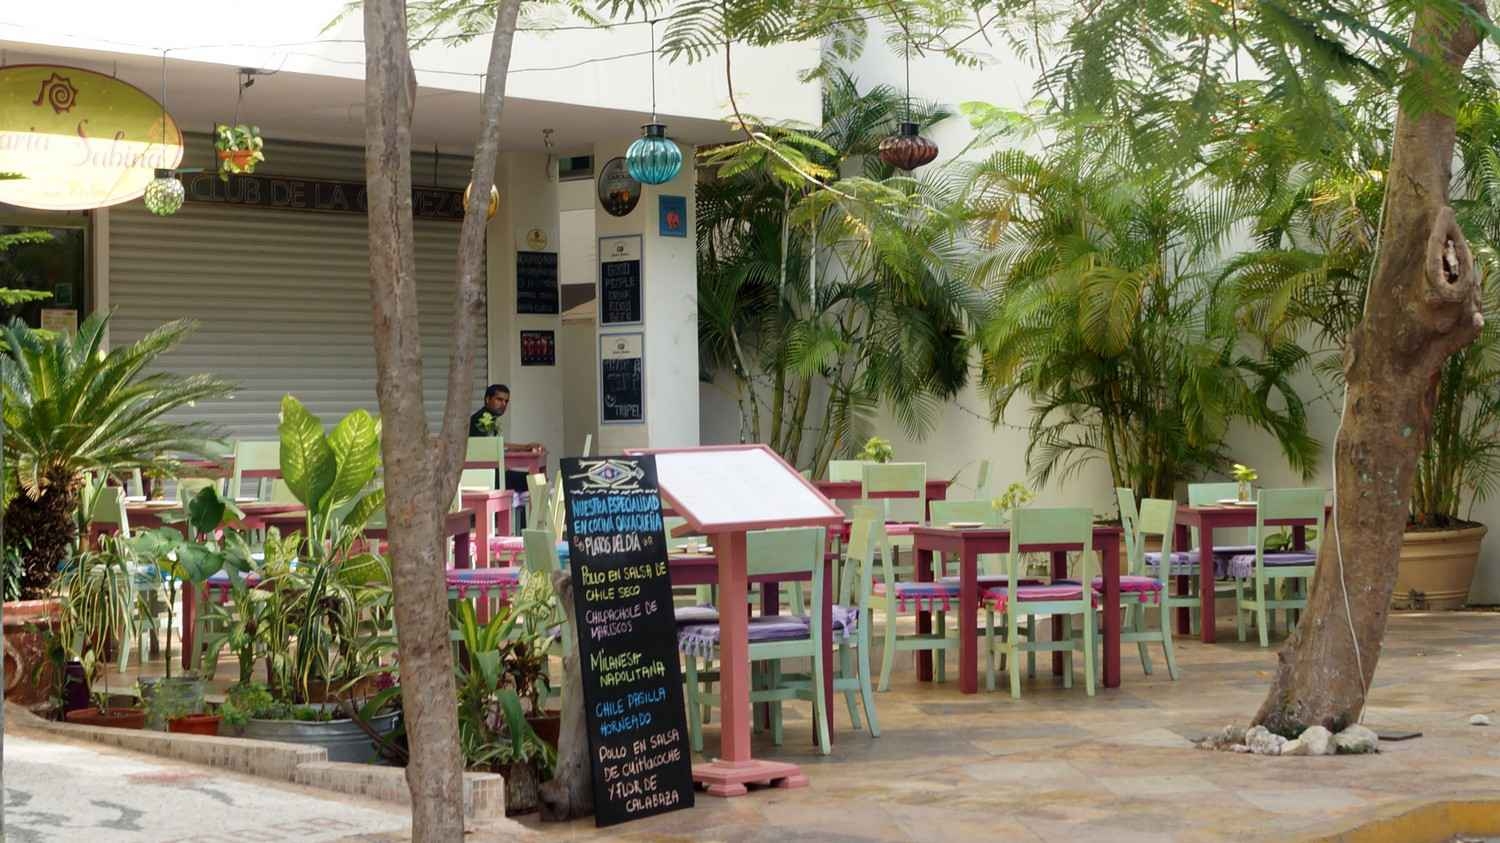 A small outdoor restaurant in downtown Playa Del Carmen serving healthy food.